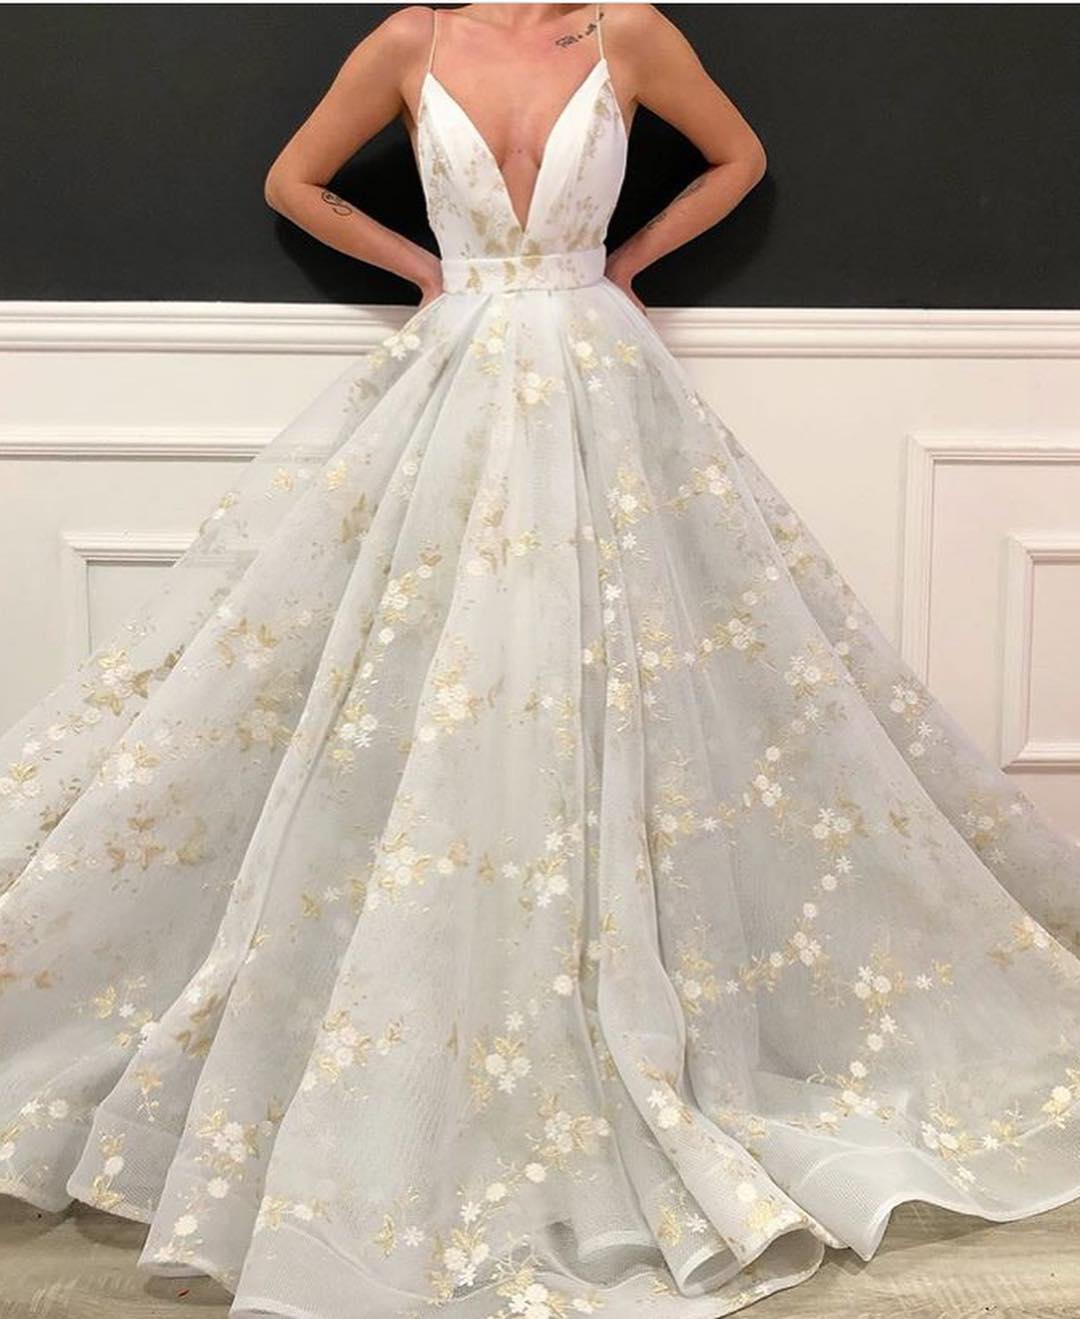 gowns for women, gowns for girls, gowns for sale, gowns for weddings, gowns for prom, gowns dresses, gowns beautiful gowns, gowns images, gowns for girls, gowns design, gowns fashion show, gowns white